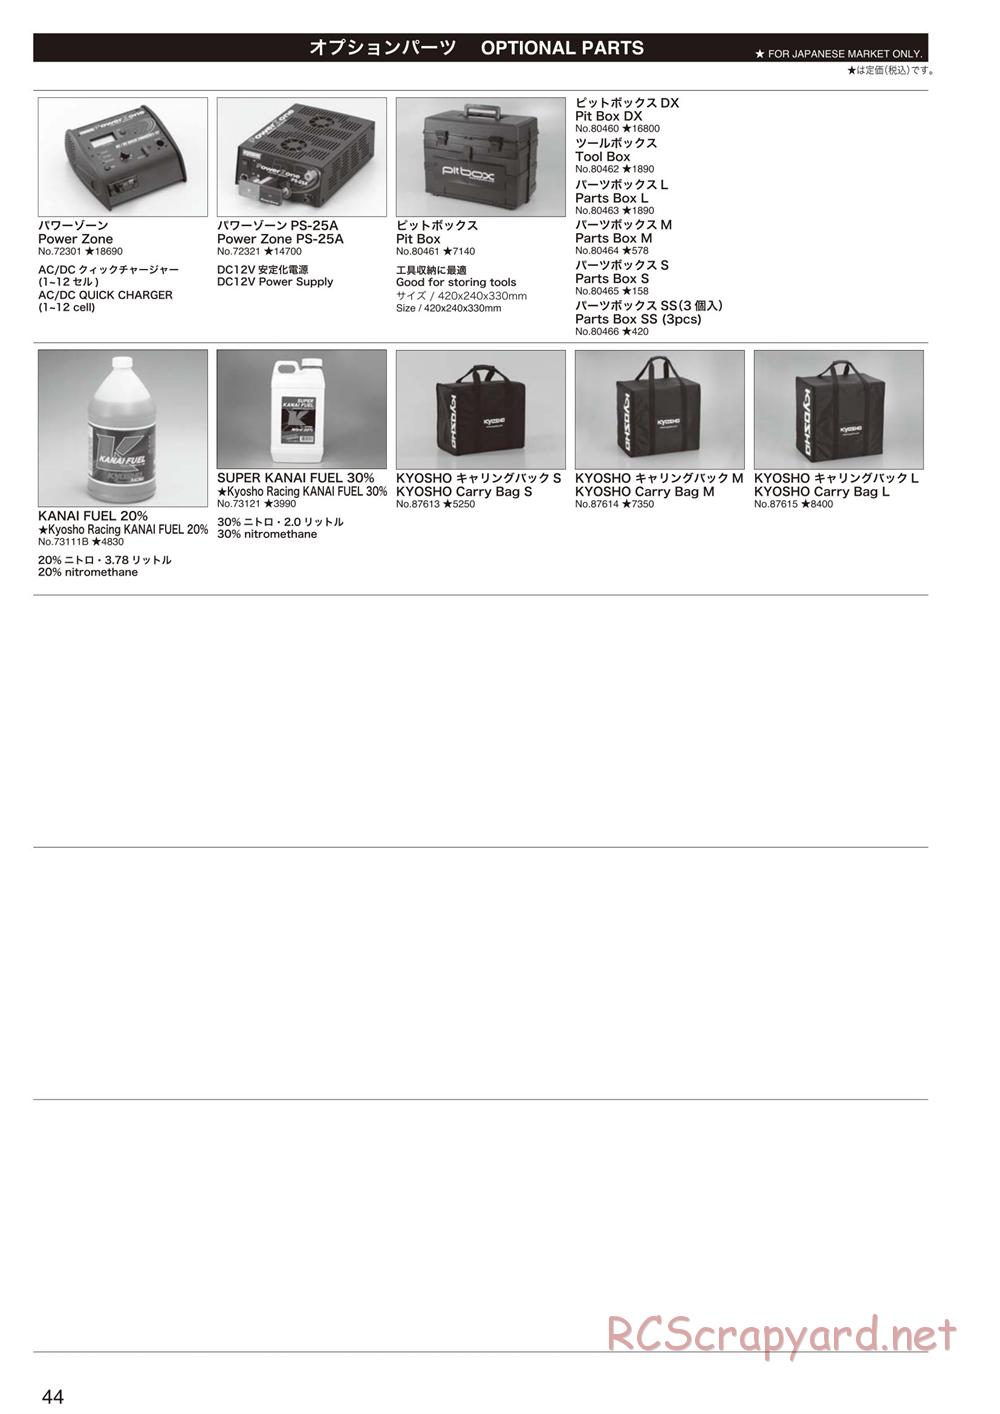 Kyosho - Inferno Neo 2.0 - Parts List - Page 7